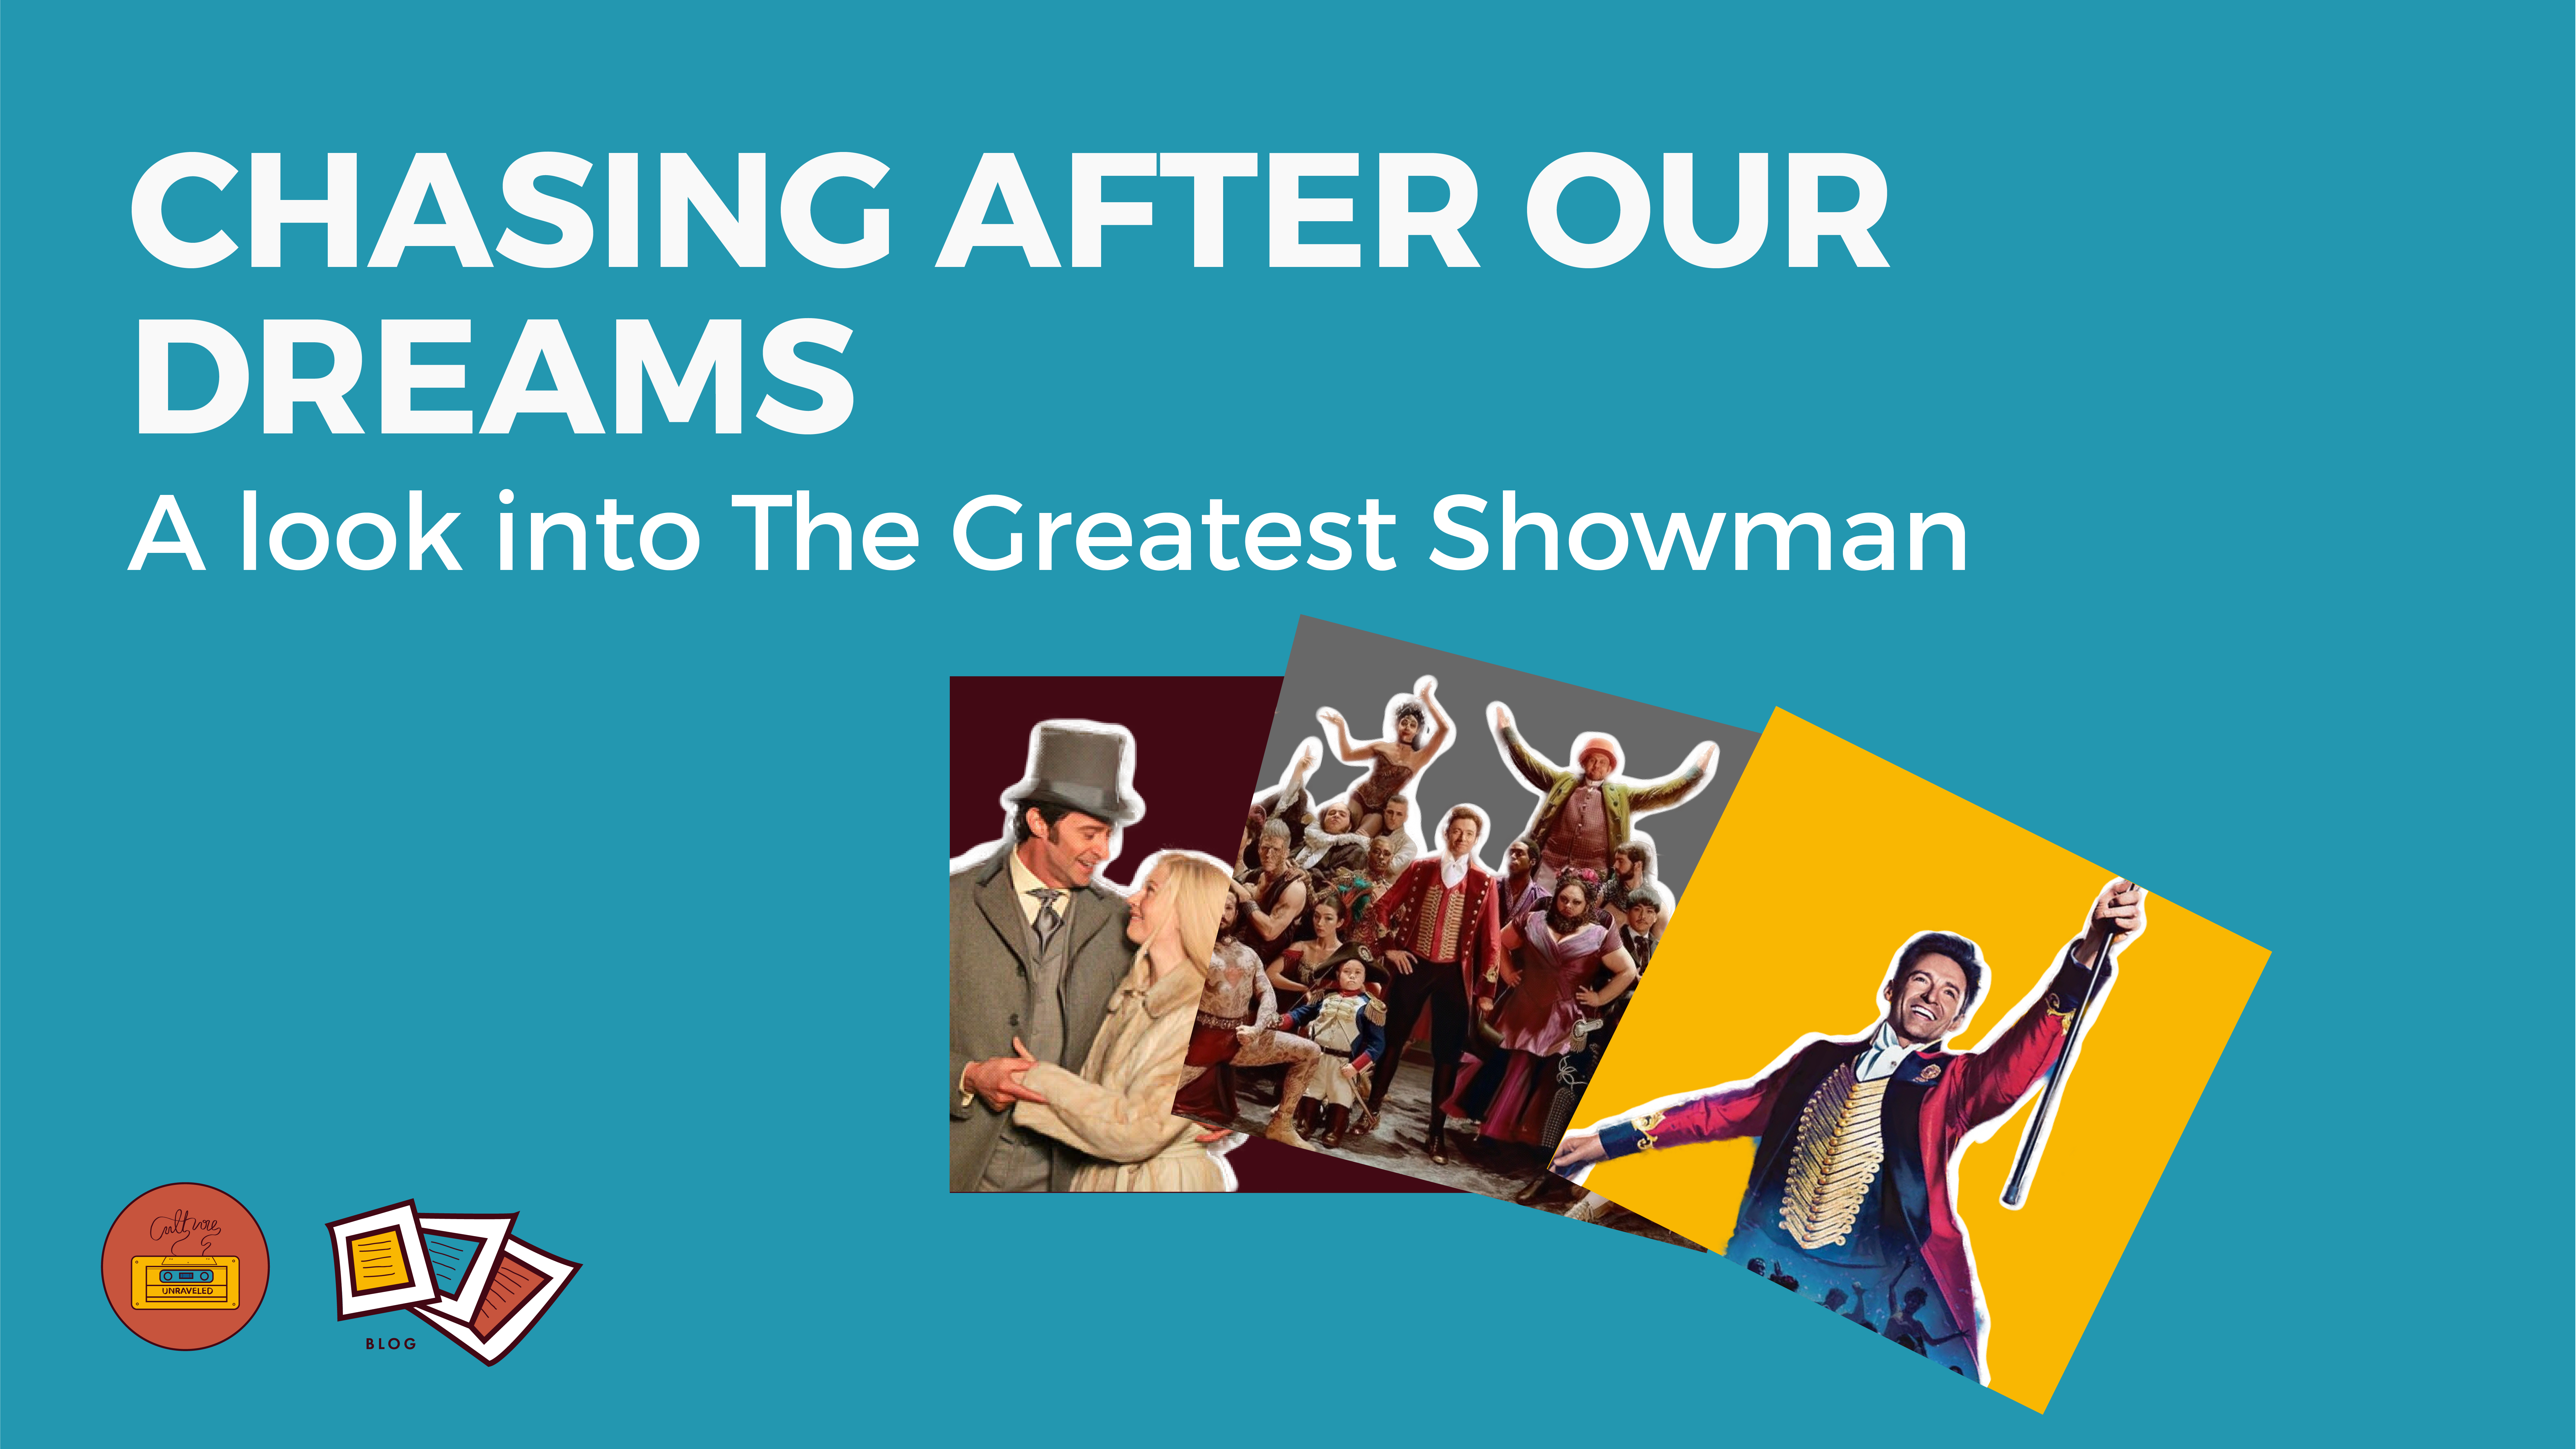 Chasing After Our Dreams: A look into The Greatest Showman